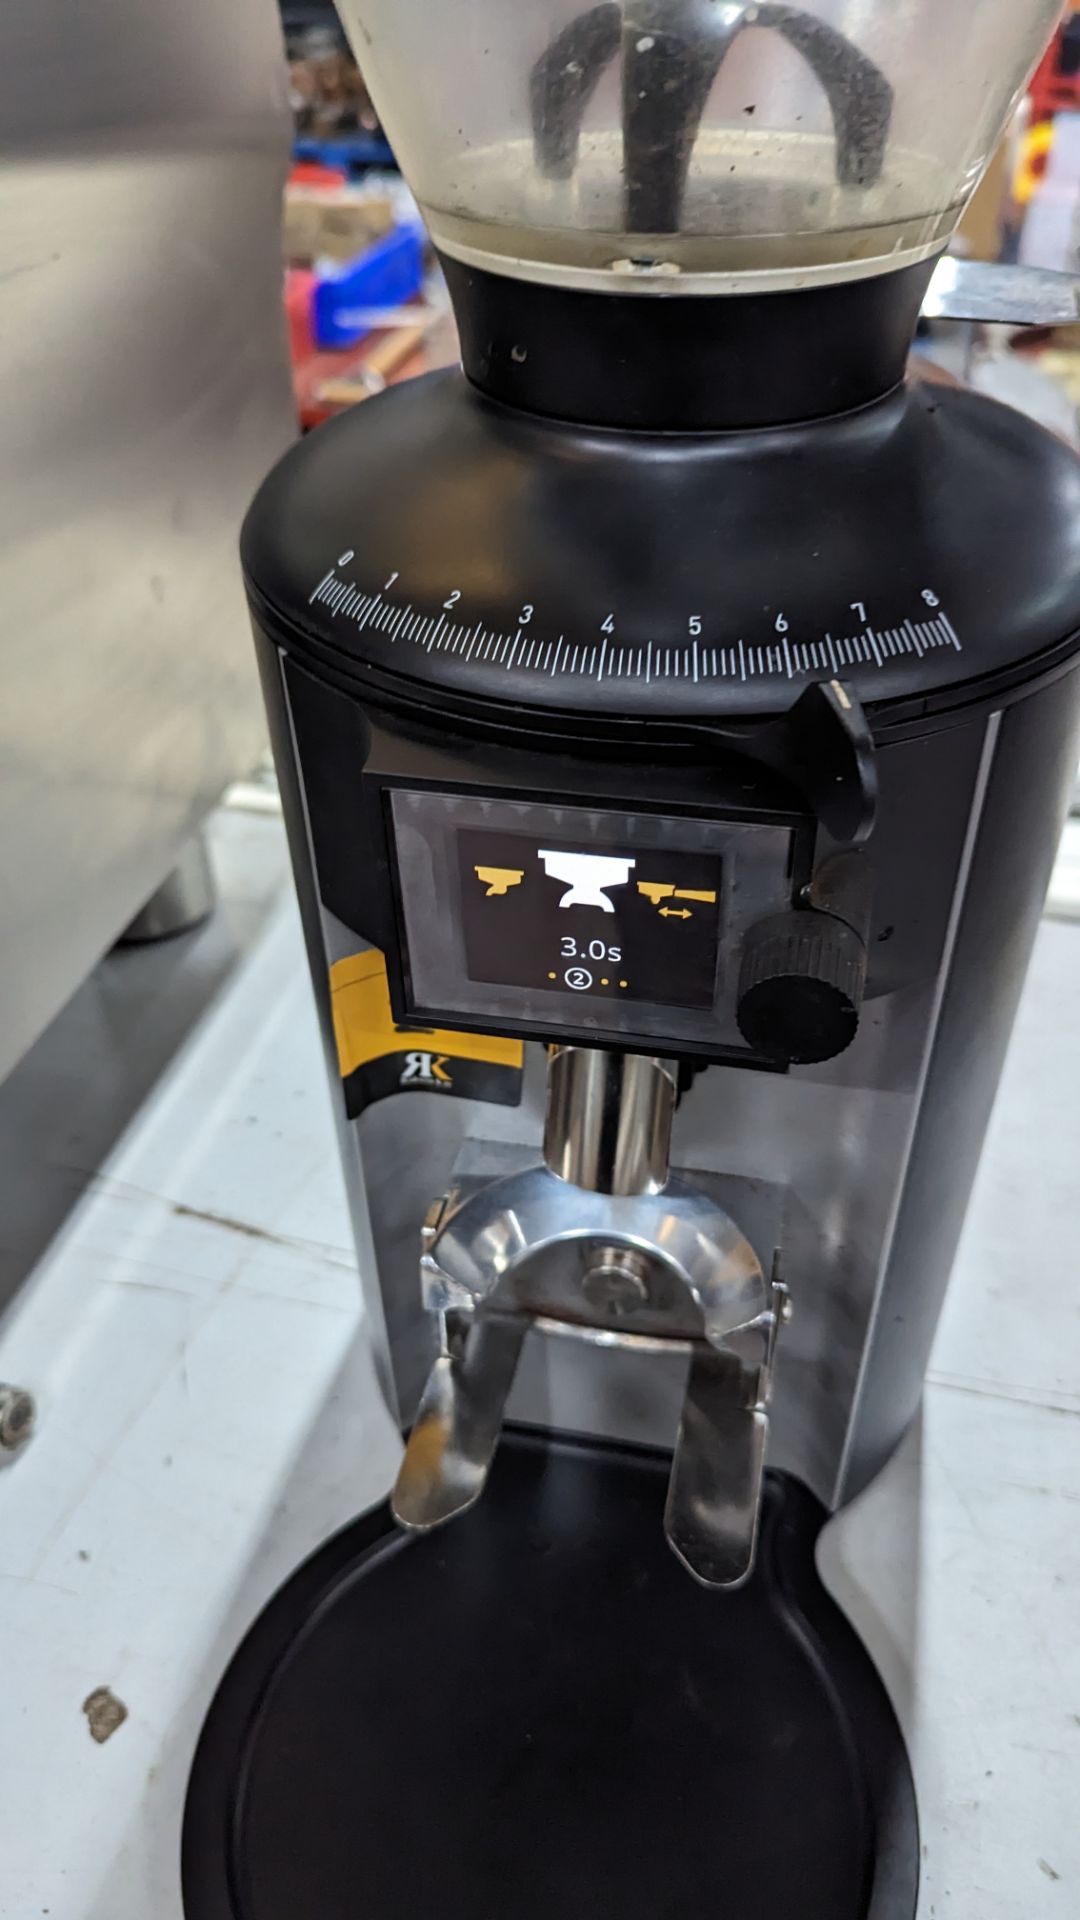 Anfim Pratica commercial coffee grinder with digital display, model AE652.4B - Image 8 of 17